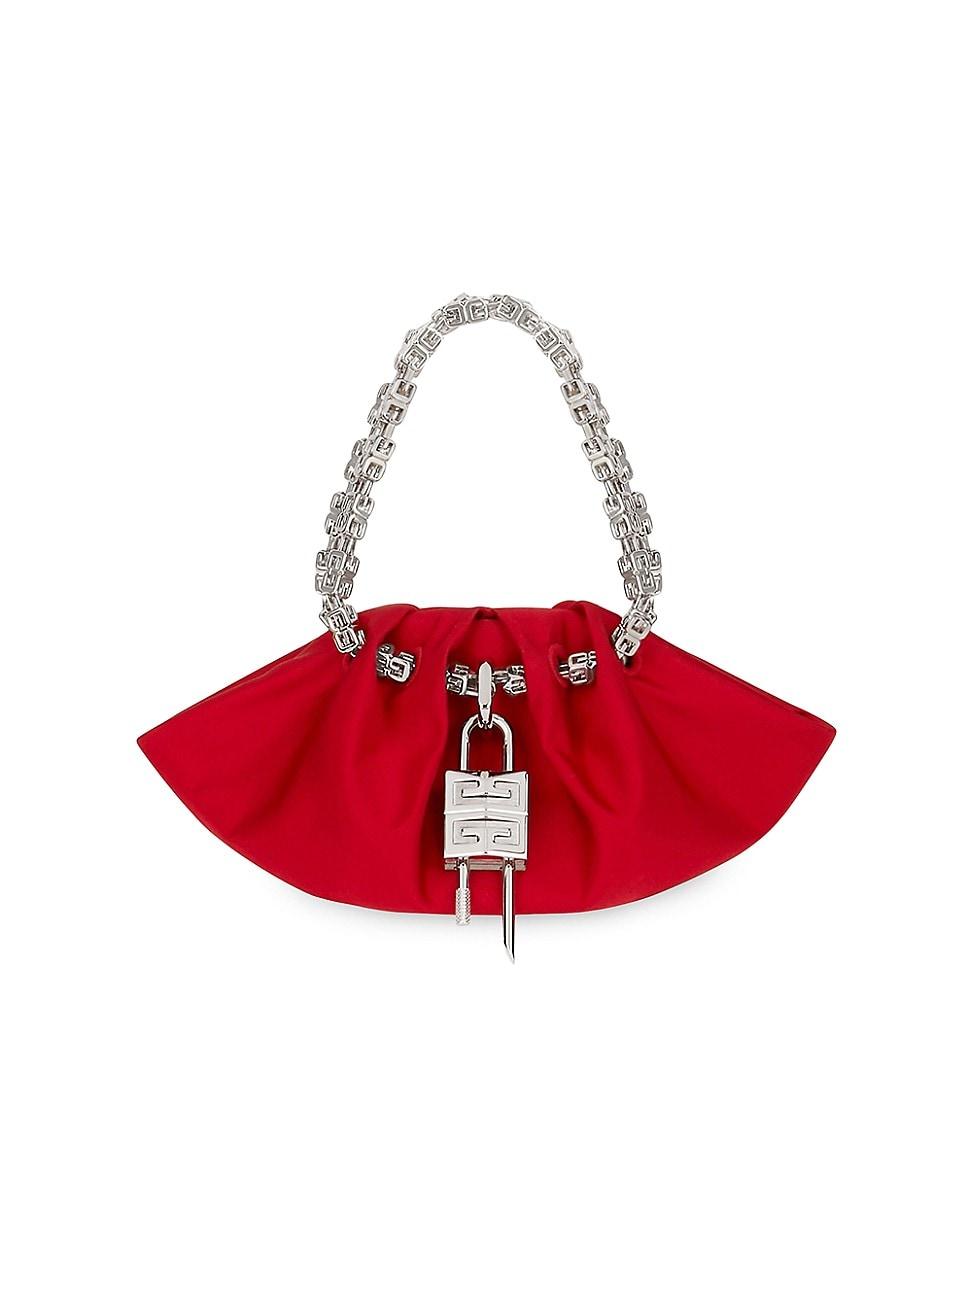 Givenchy Mini Kenny Bag In Satin in Red | Lyst